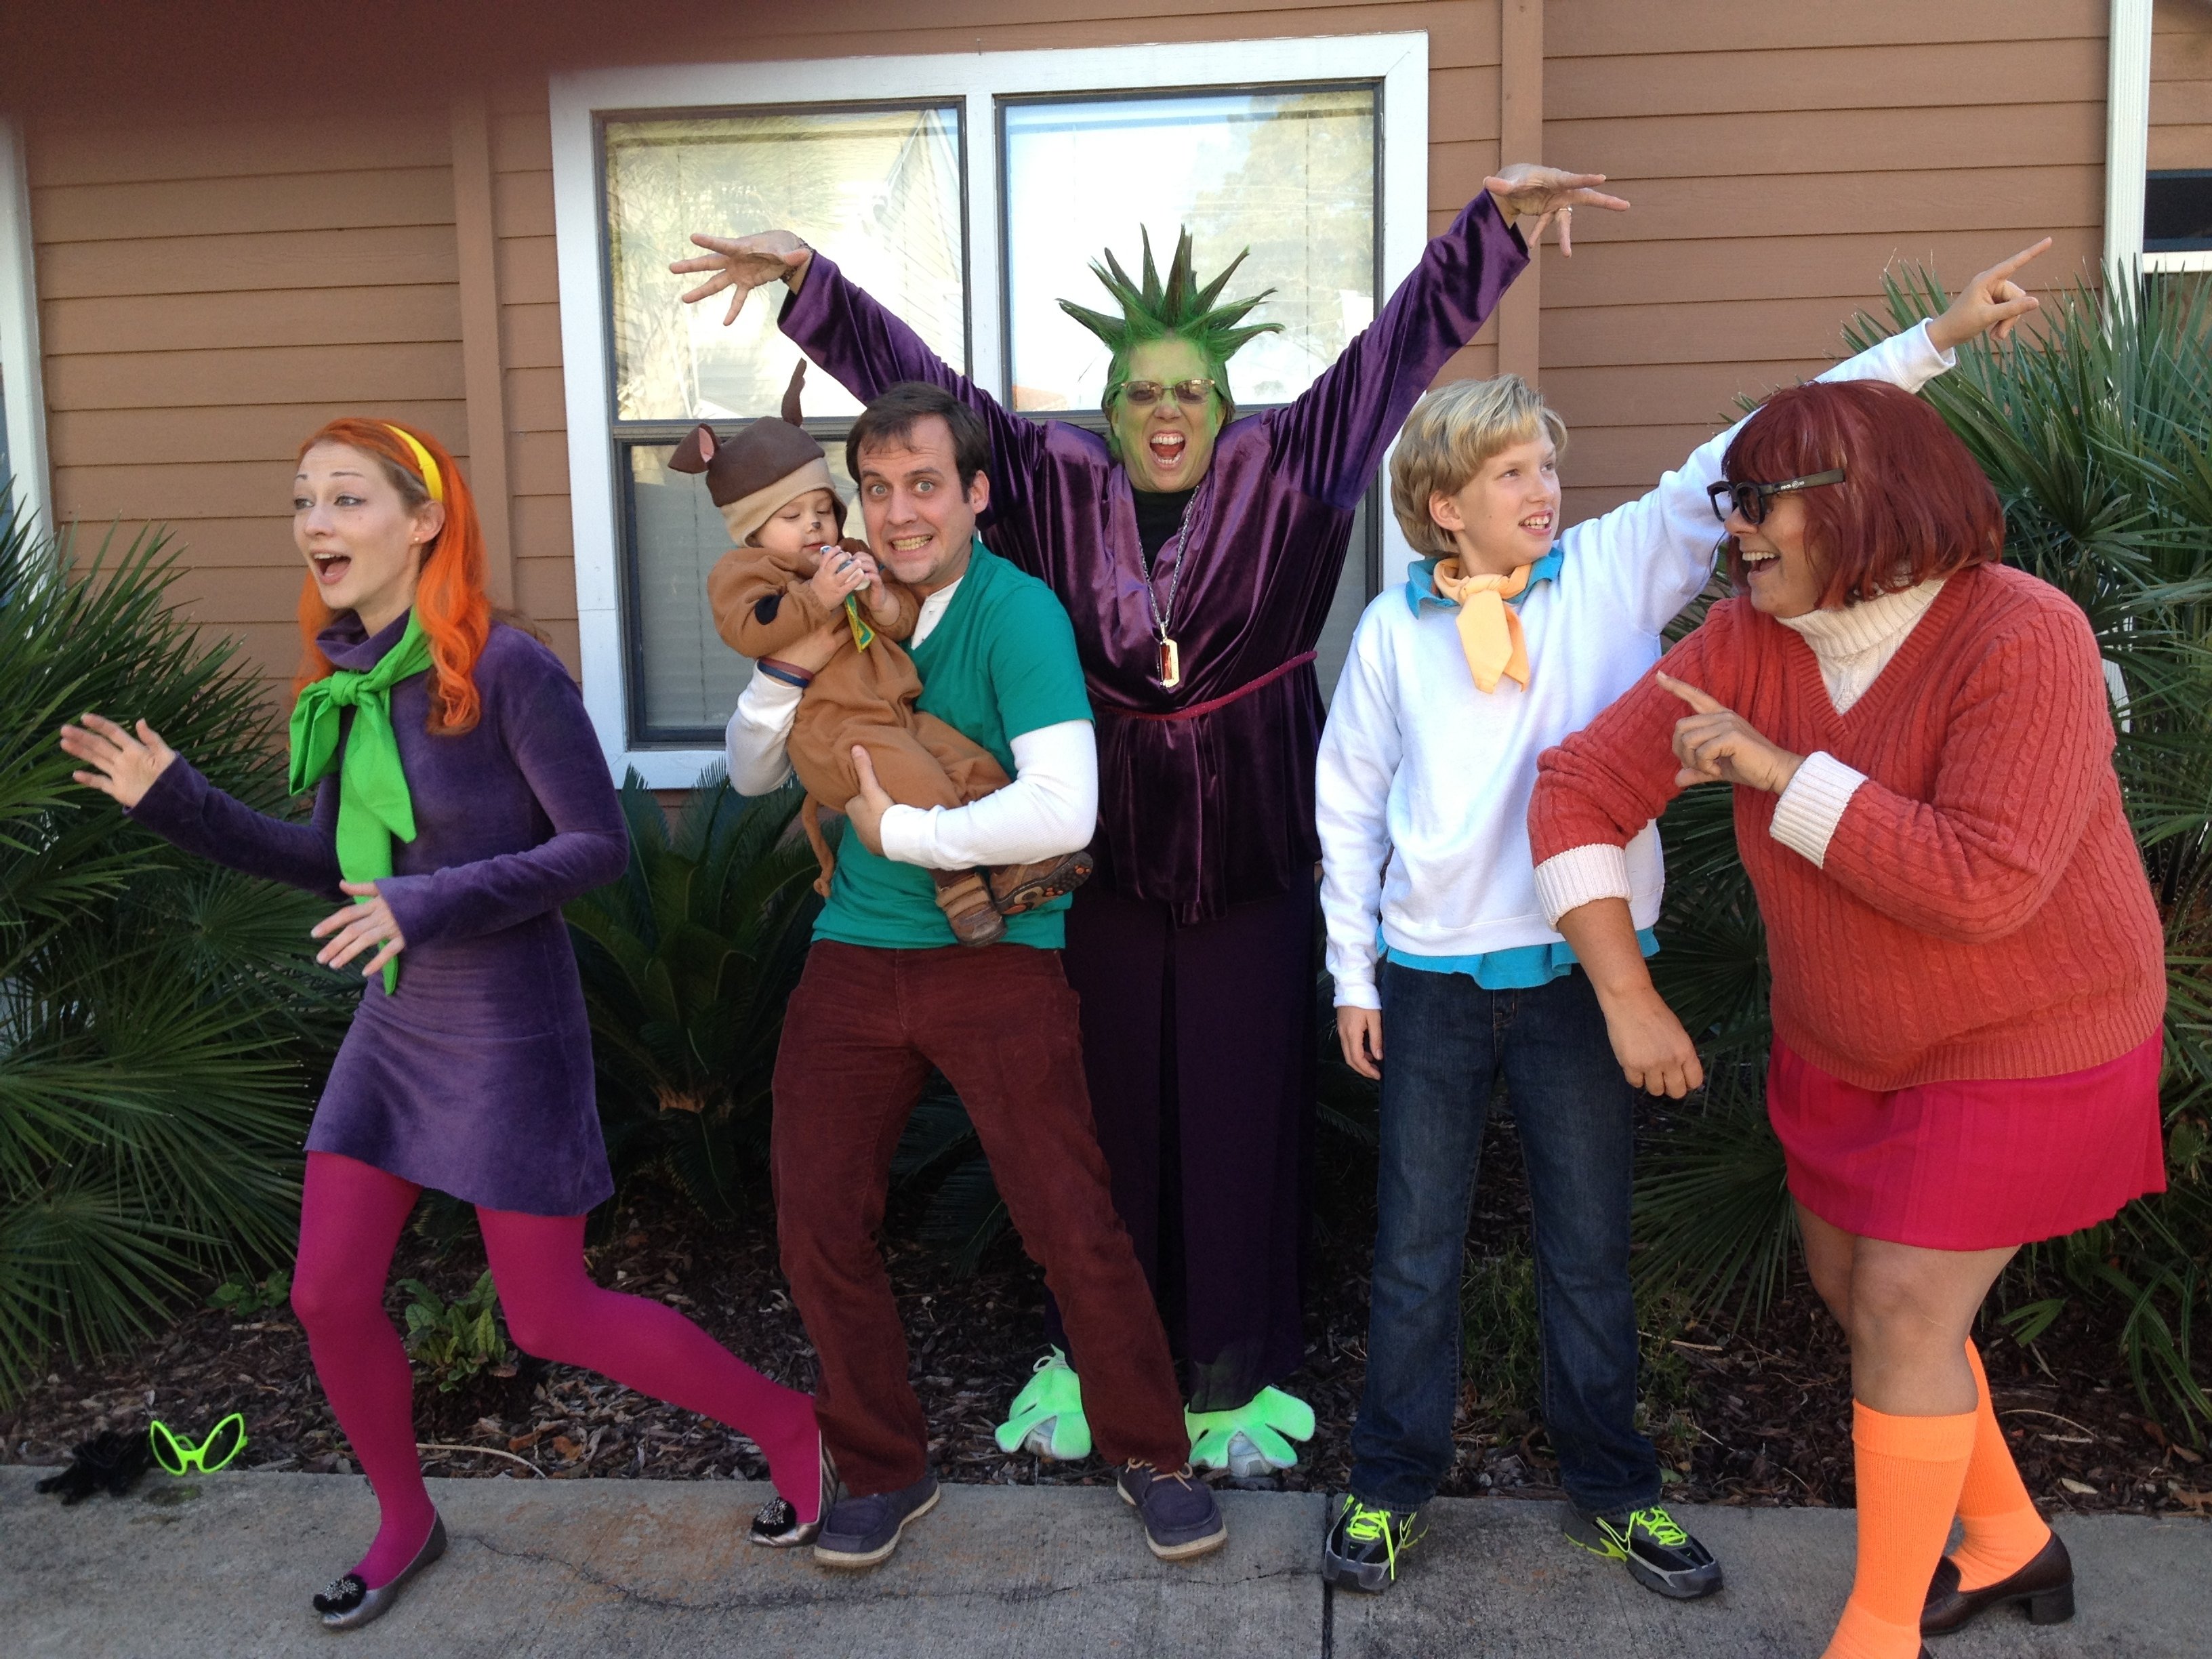 10 Attractive Halloween Costume Ideas For Groups Of 5 2023